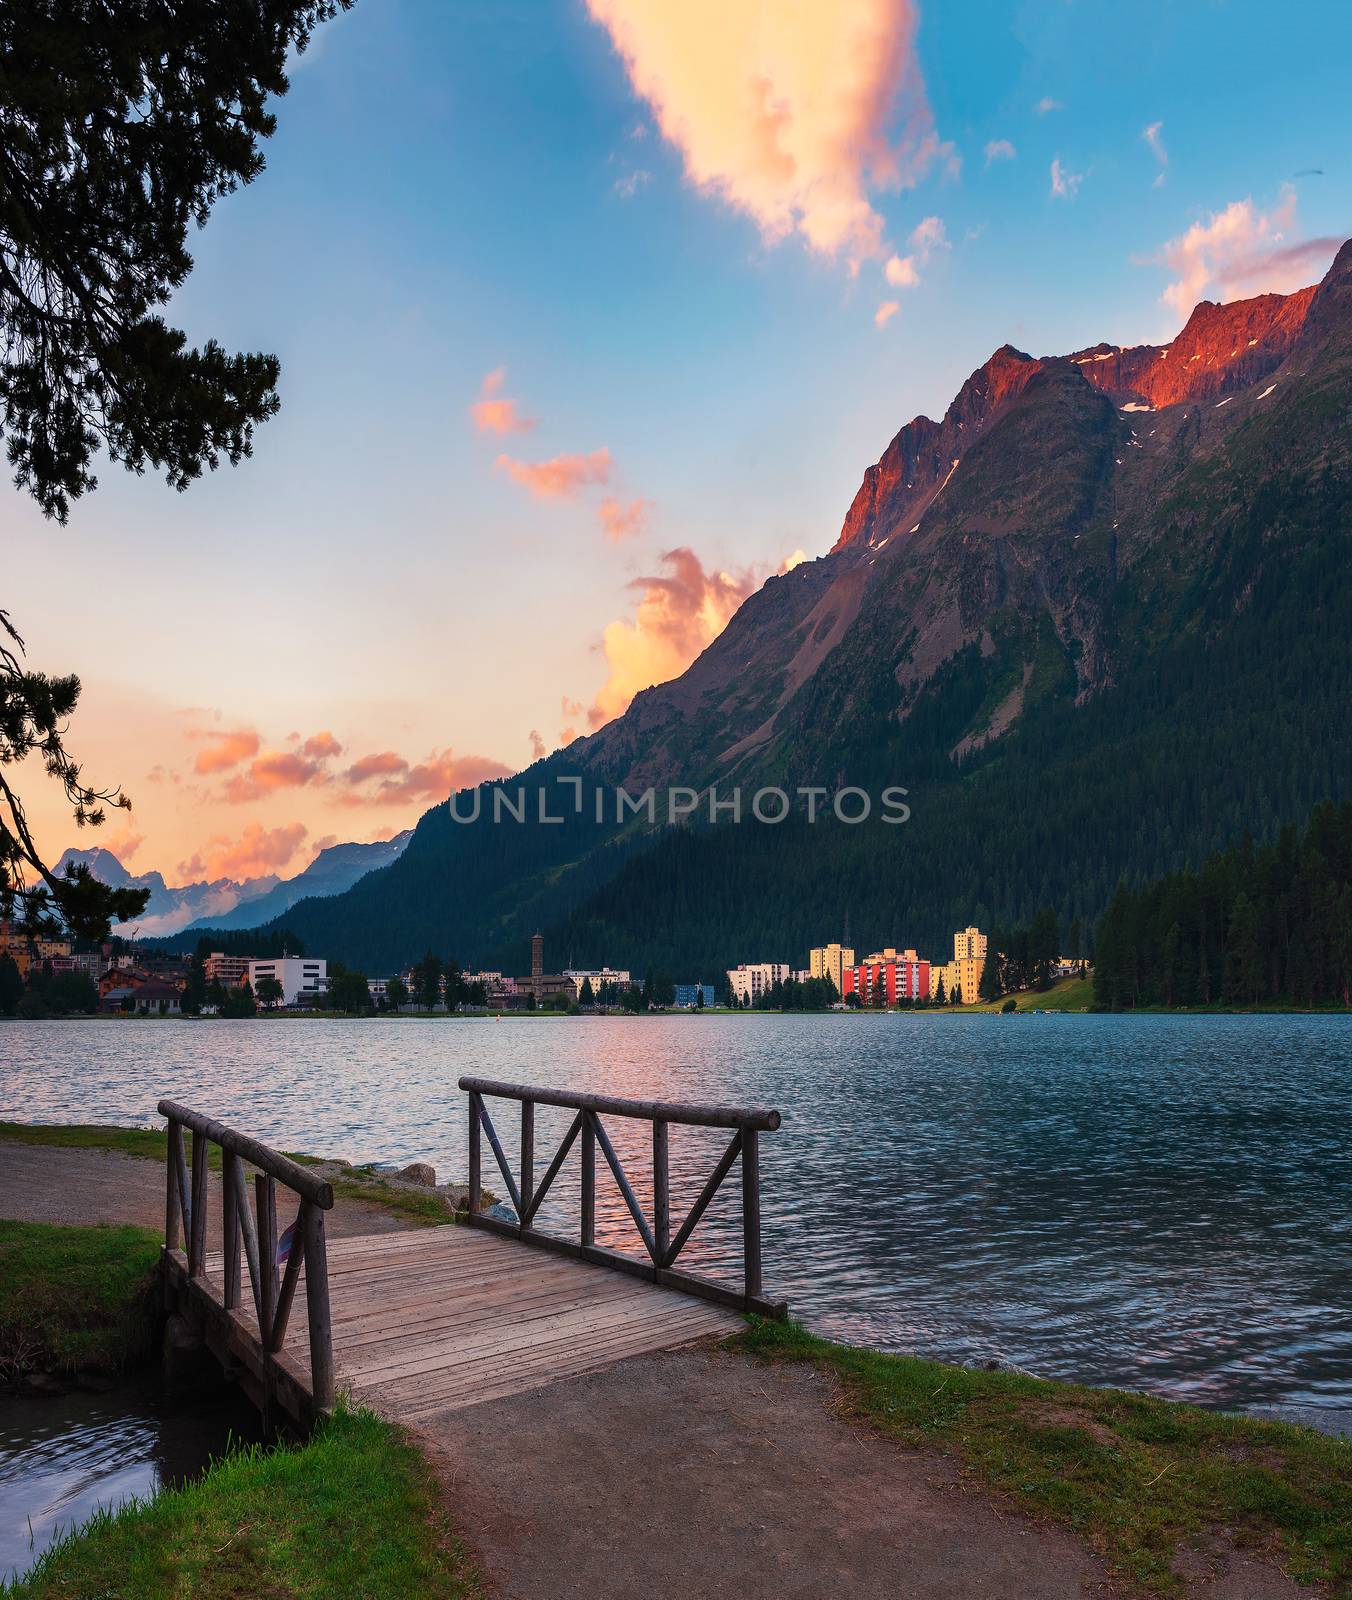 Sunset above St. Moritz with lake also called St. Moritzsee, a wooden footbridge in the foreground and Swiss Alps in the background in Engadin, Switzerland.